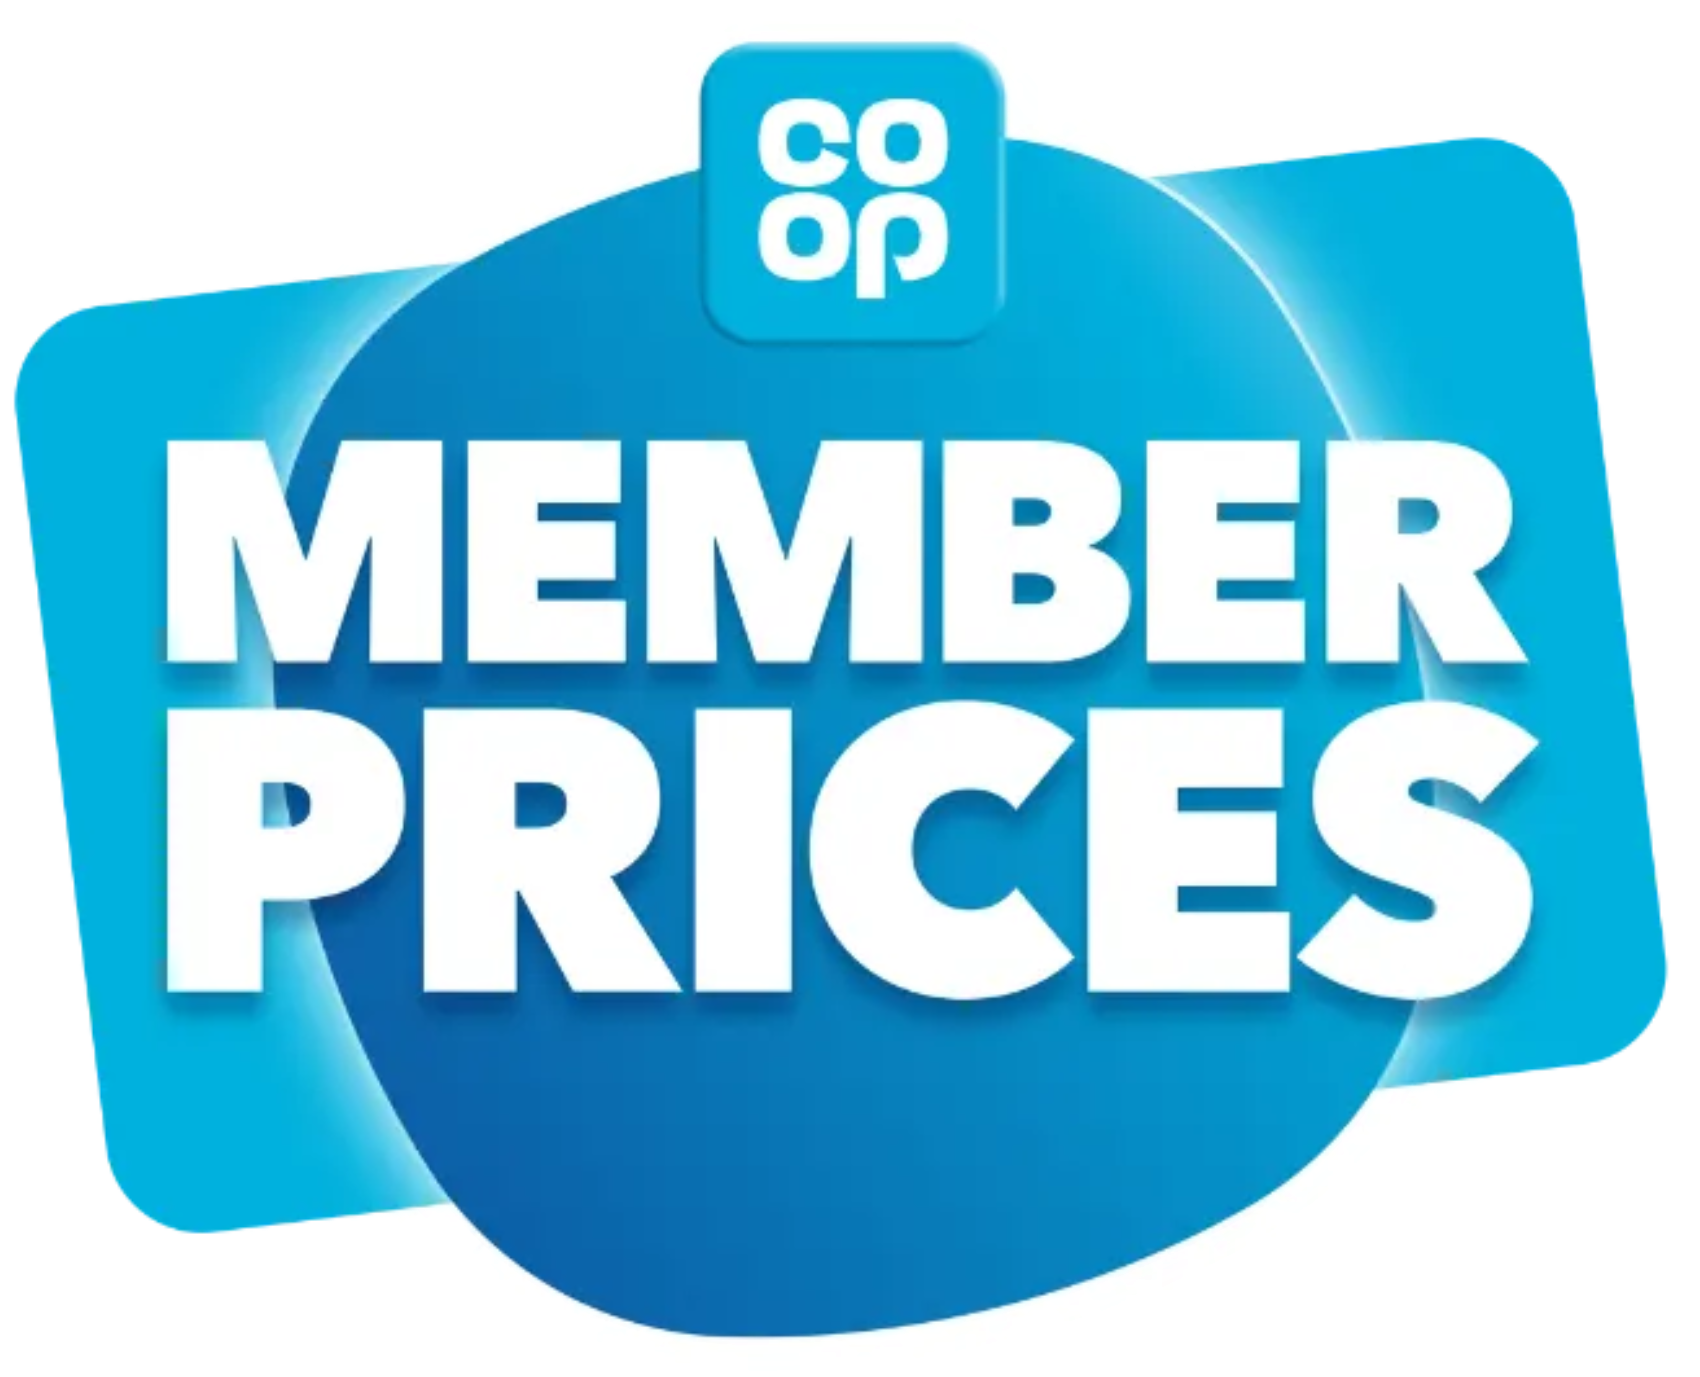 co op travel insurance over 80